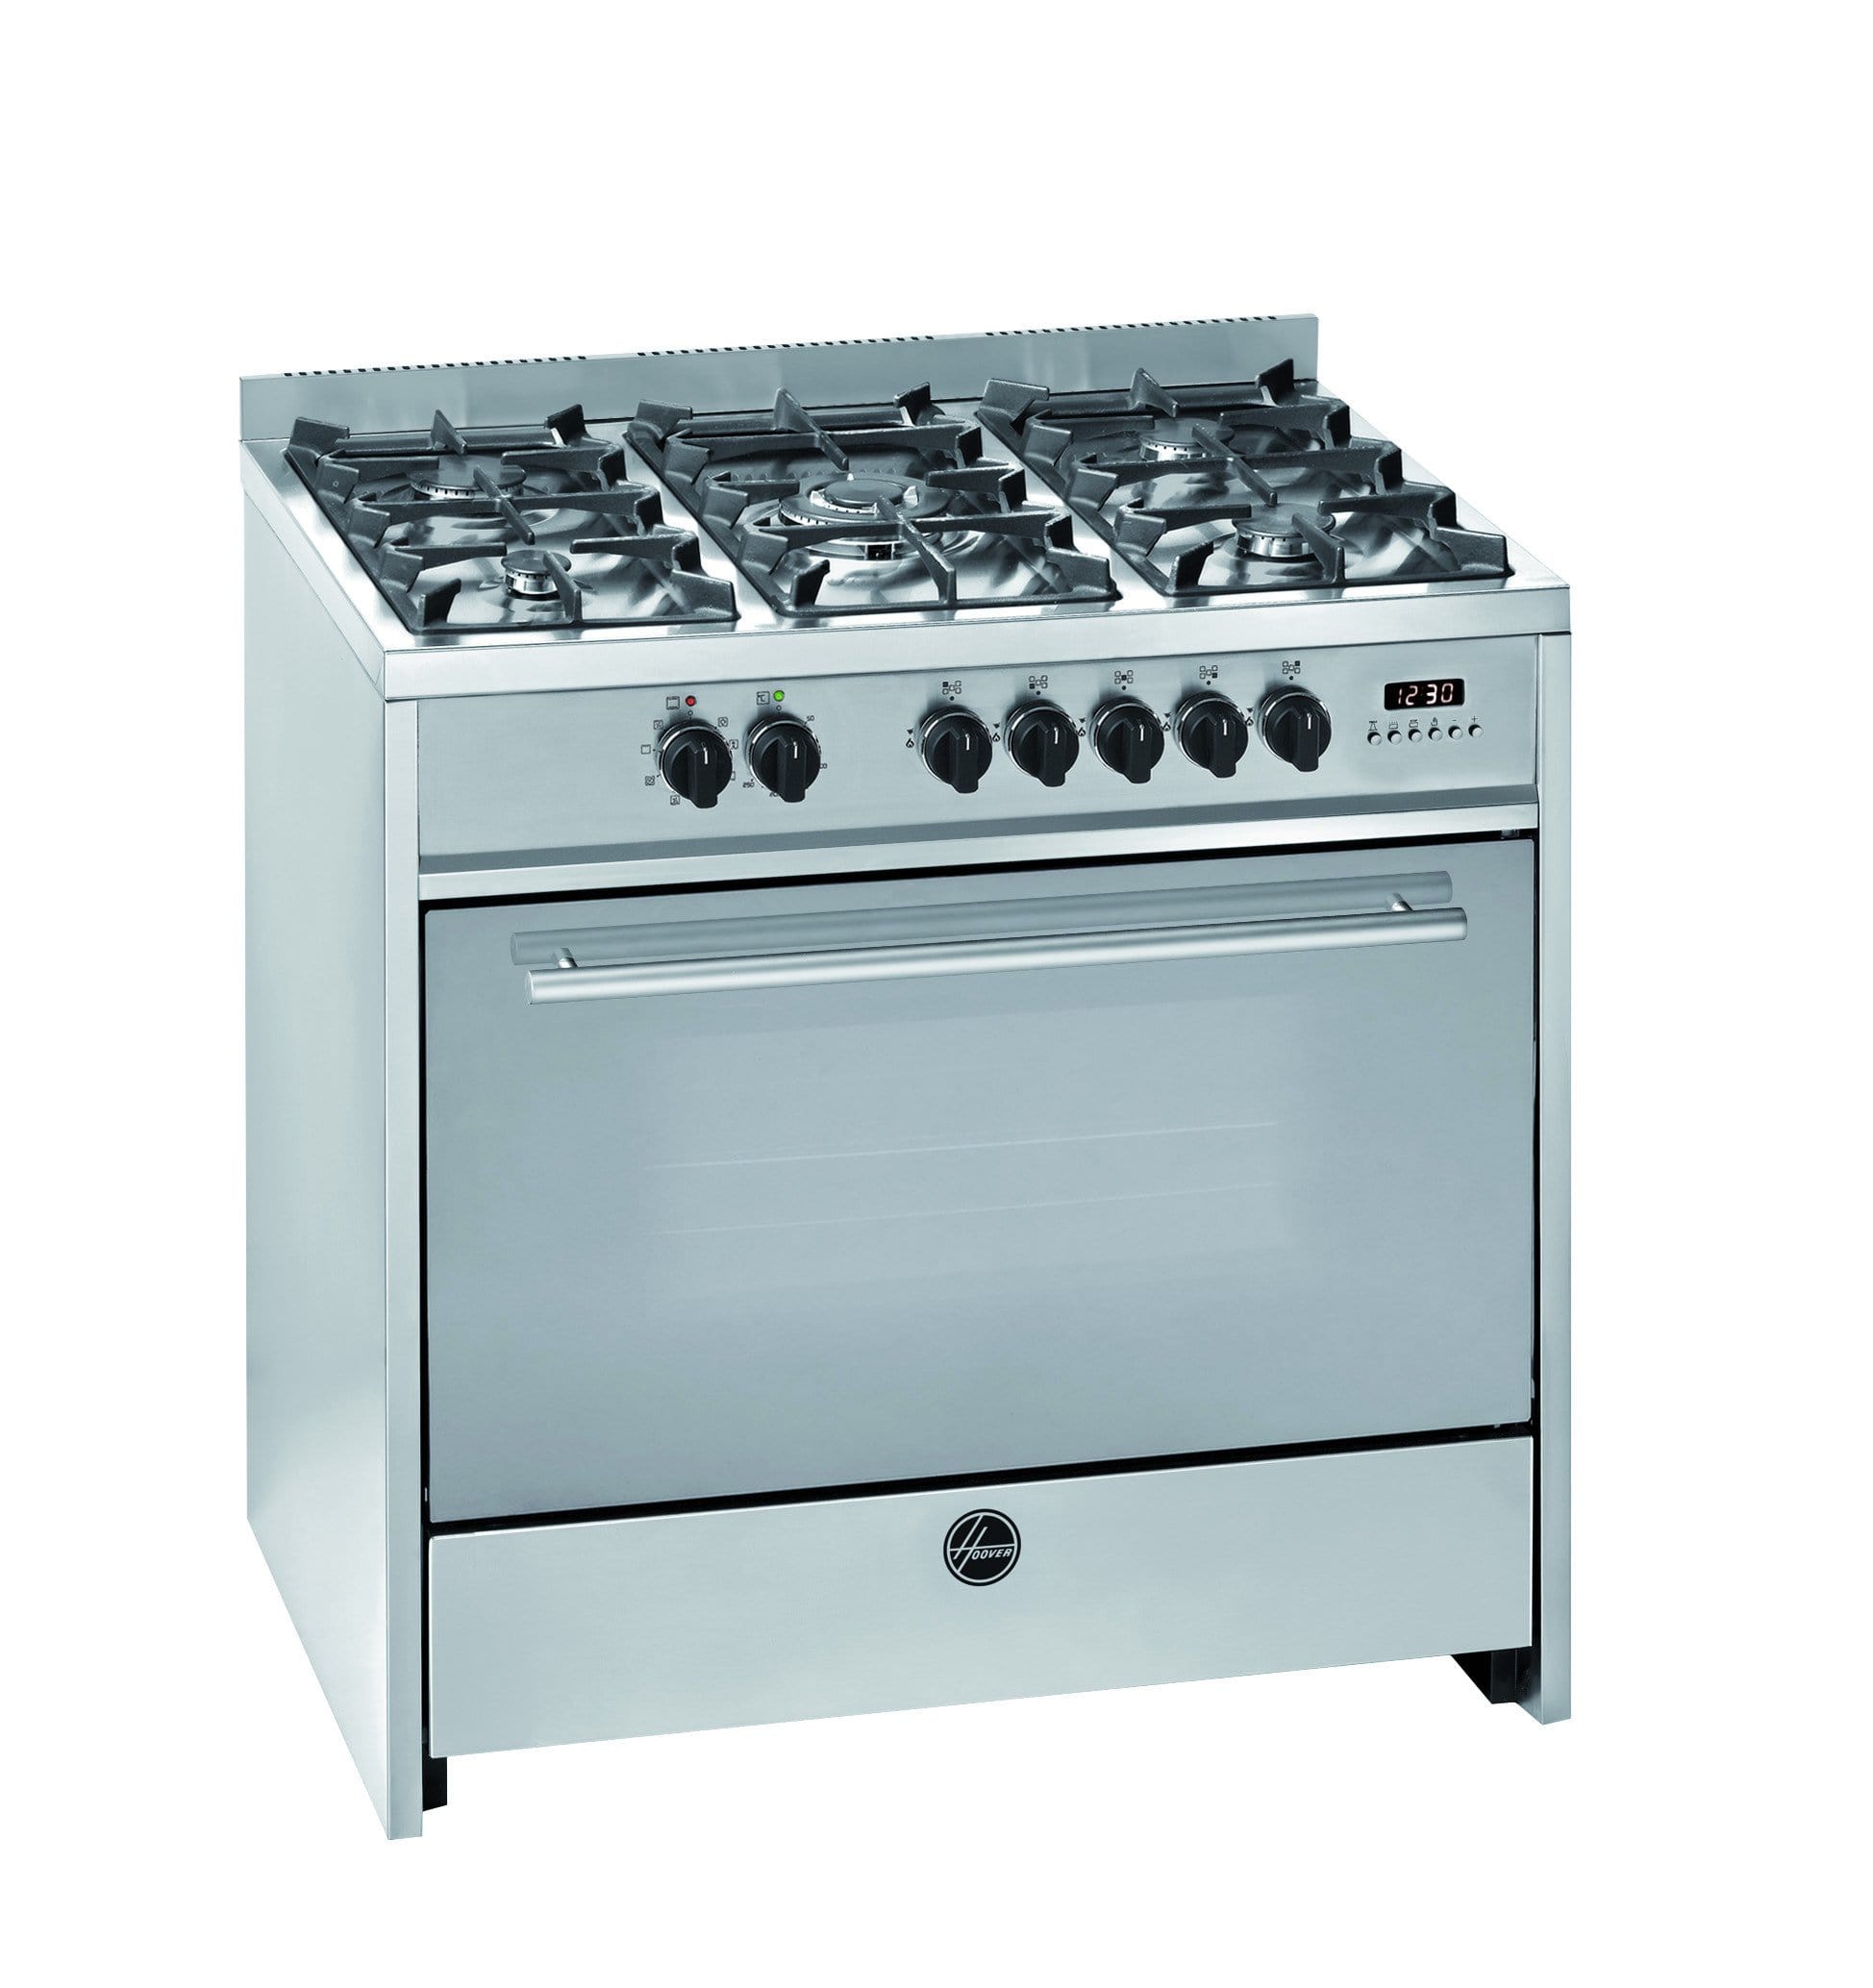 HOOVER 90X 60 TOP GAS, ELECTRIC OVEN COOKER, CAST IRON, STEEL, HMC-M95E-01X